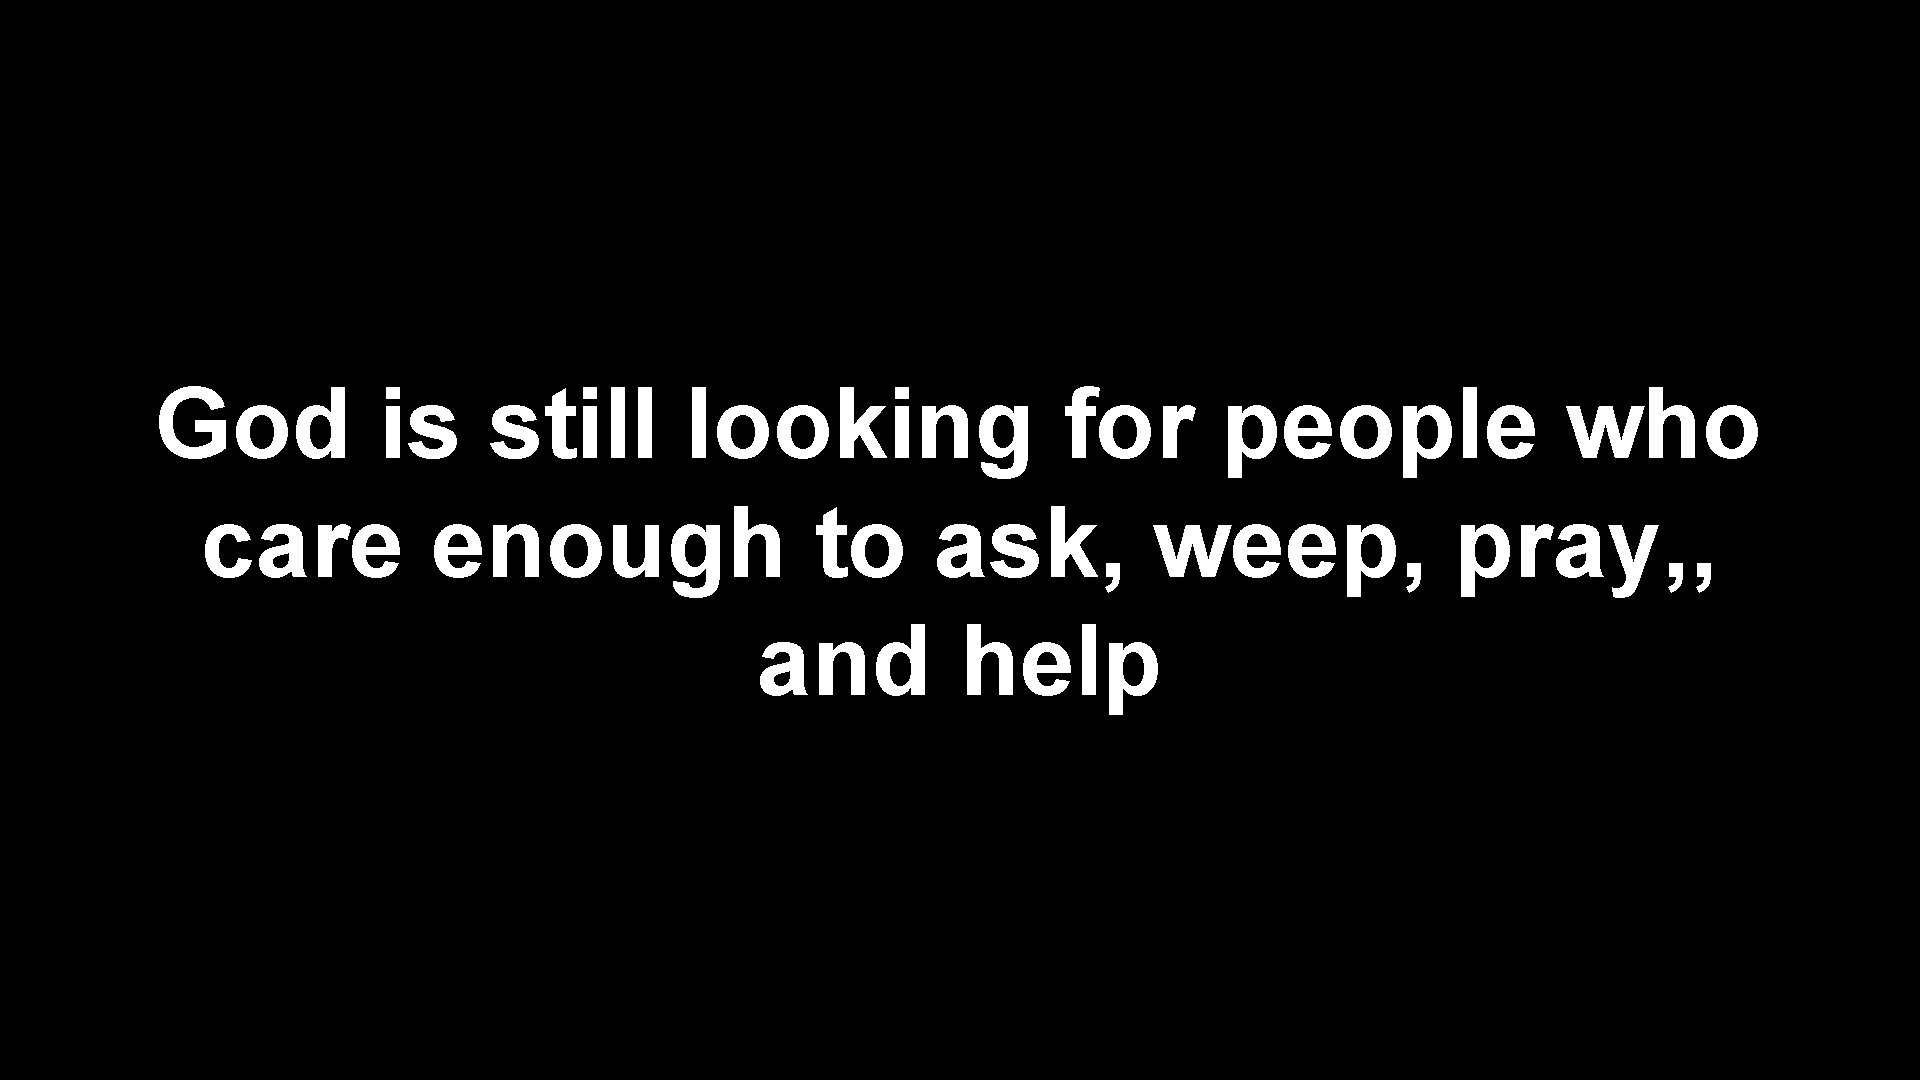 God is still looking for people who care enough to ask, weep, pray, ,